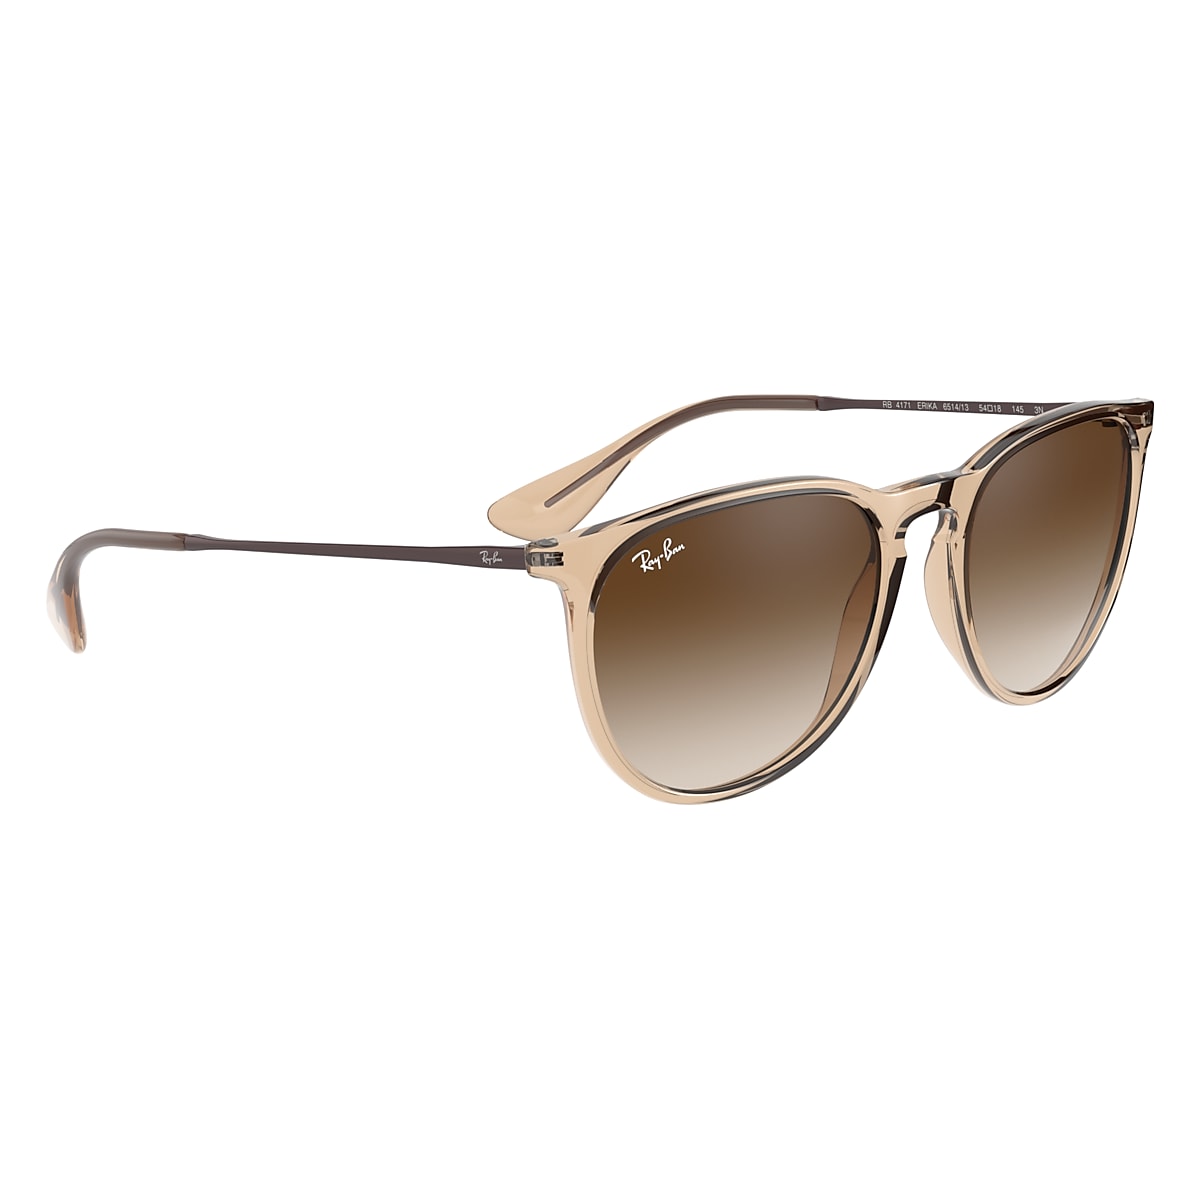 ERIKA COLOR Sunglasses Transparent Brown and Brown - RB4171 | Ray-Ban®